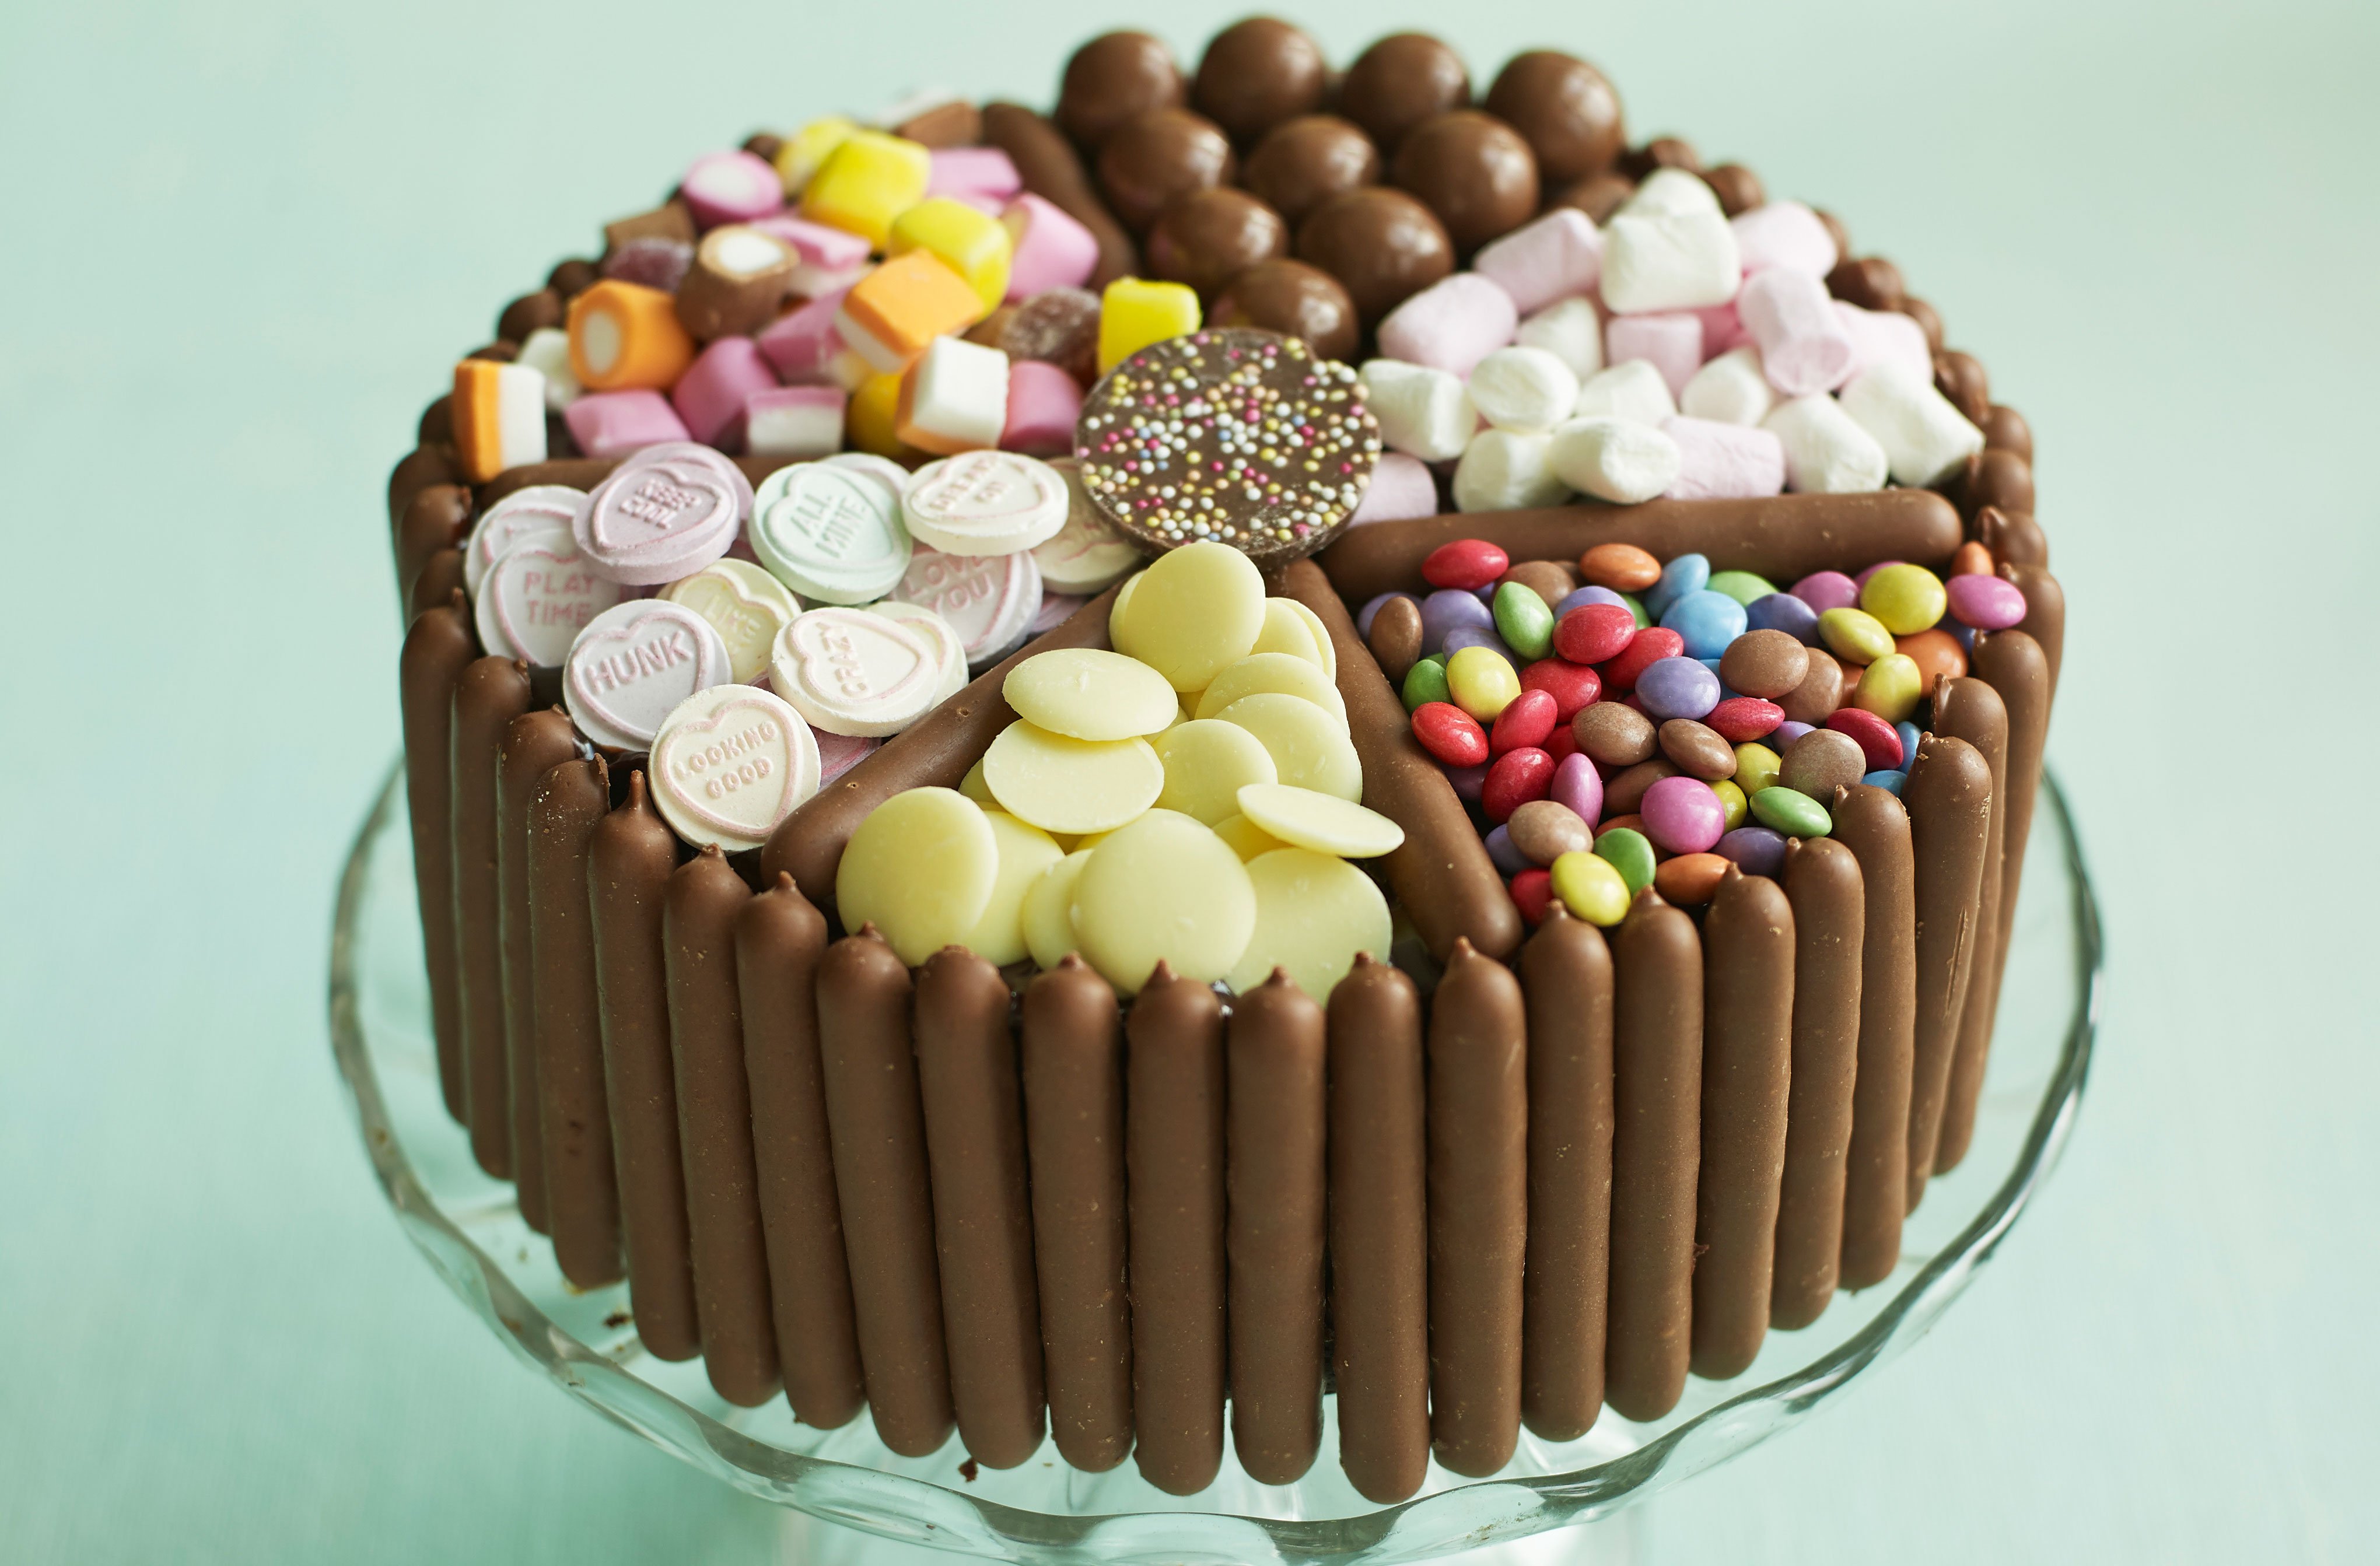 pick-and-mix-chocolate-and-sweet-cake